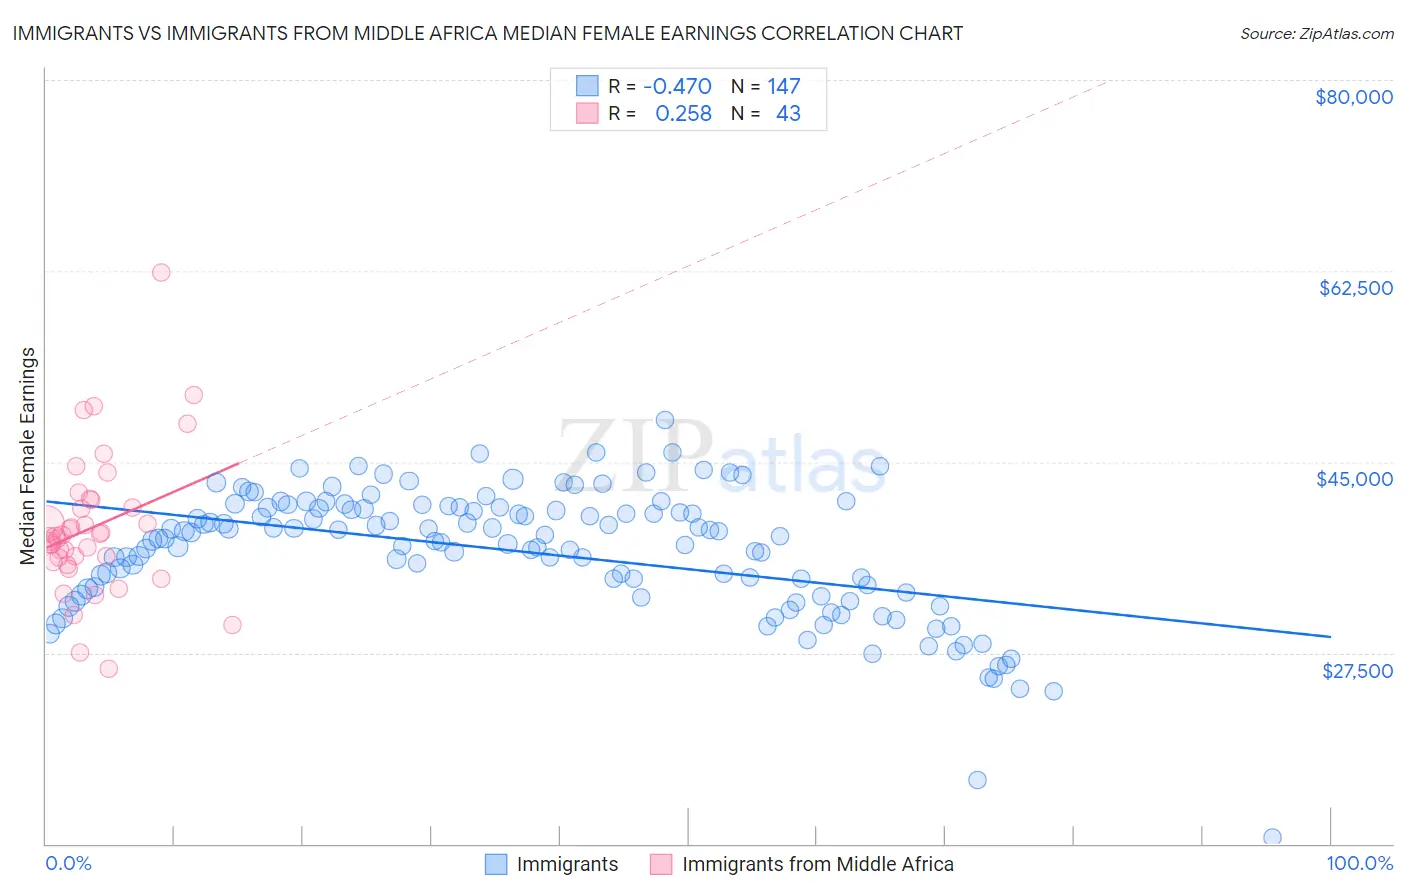 Immigrants vs Immigrants from Middle Africa Median Female Earnings